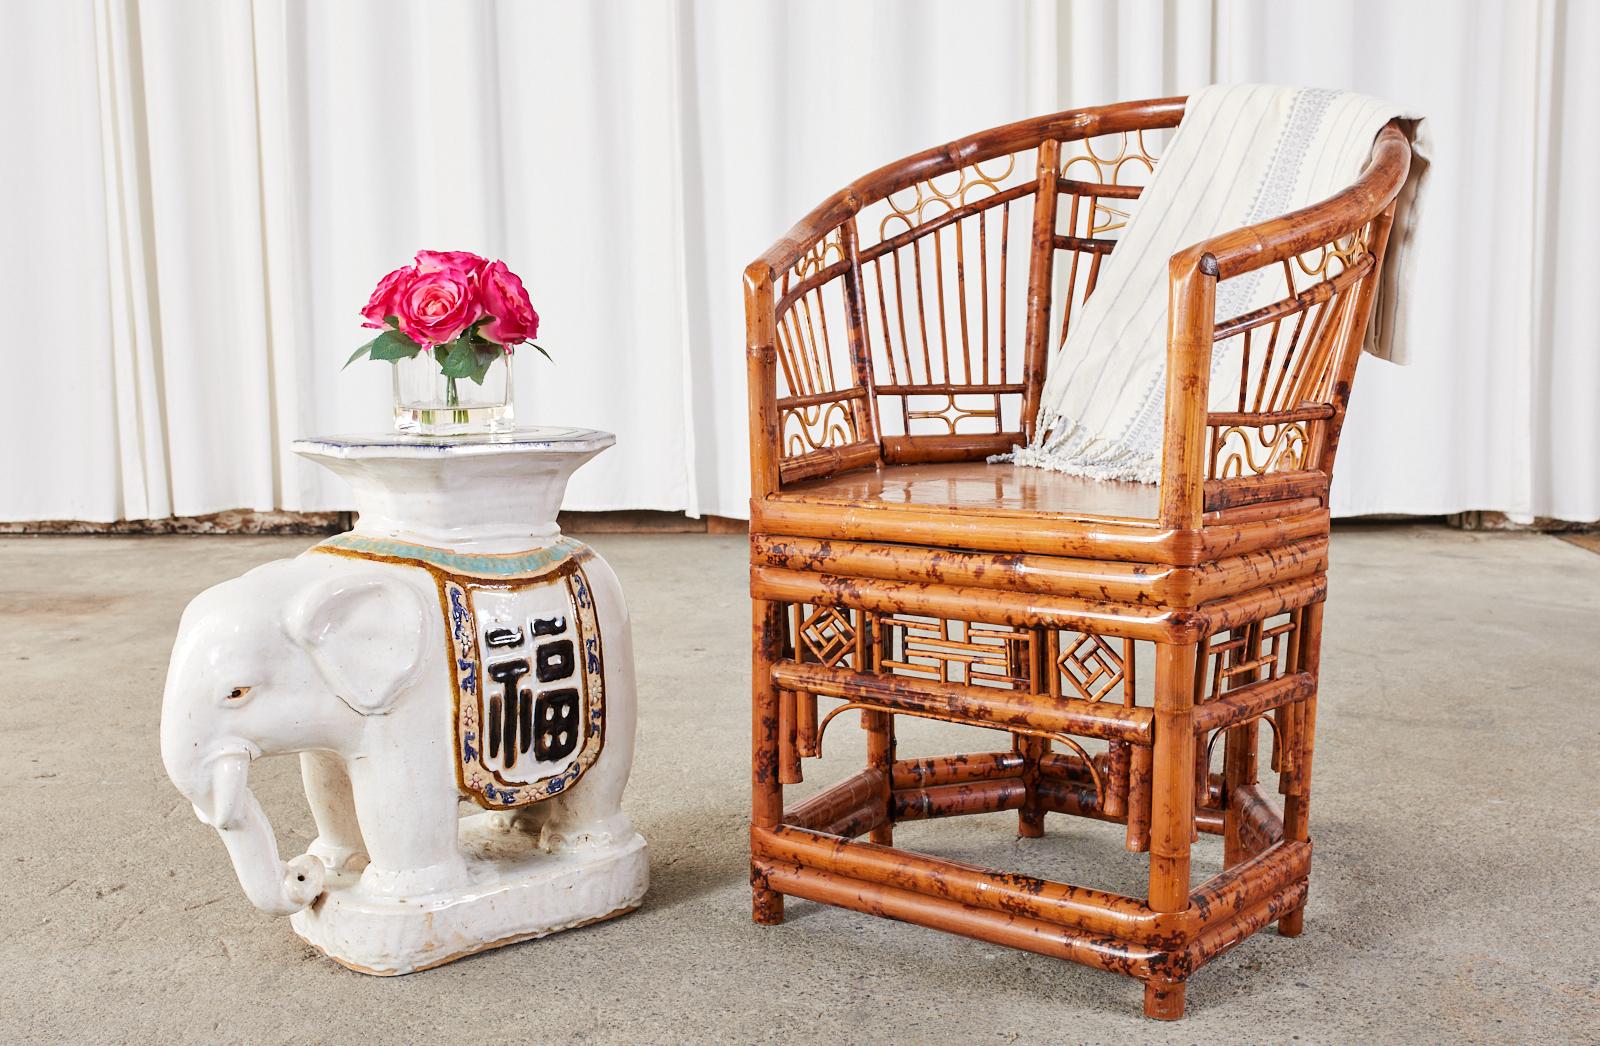 Captivating set of four English regency Brighton Pavilion style armchairs or lounge chairs crafted from bamboo and rattan. The chairs feature a horseshoe form bamboo frame decorated with open fretwork designs showcasing geometric patterns. The